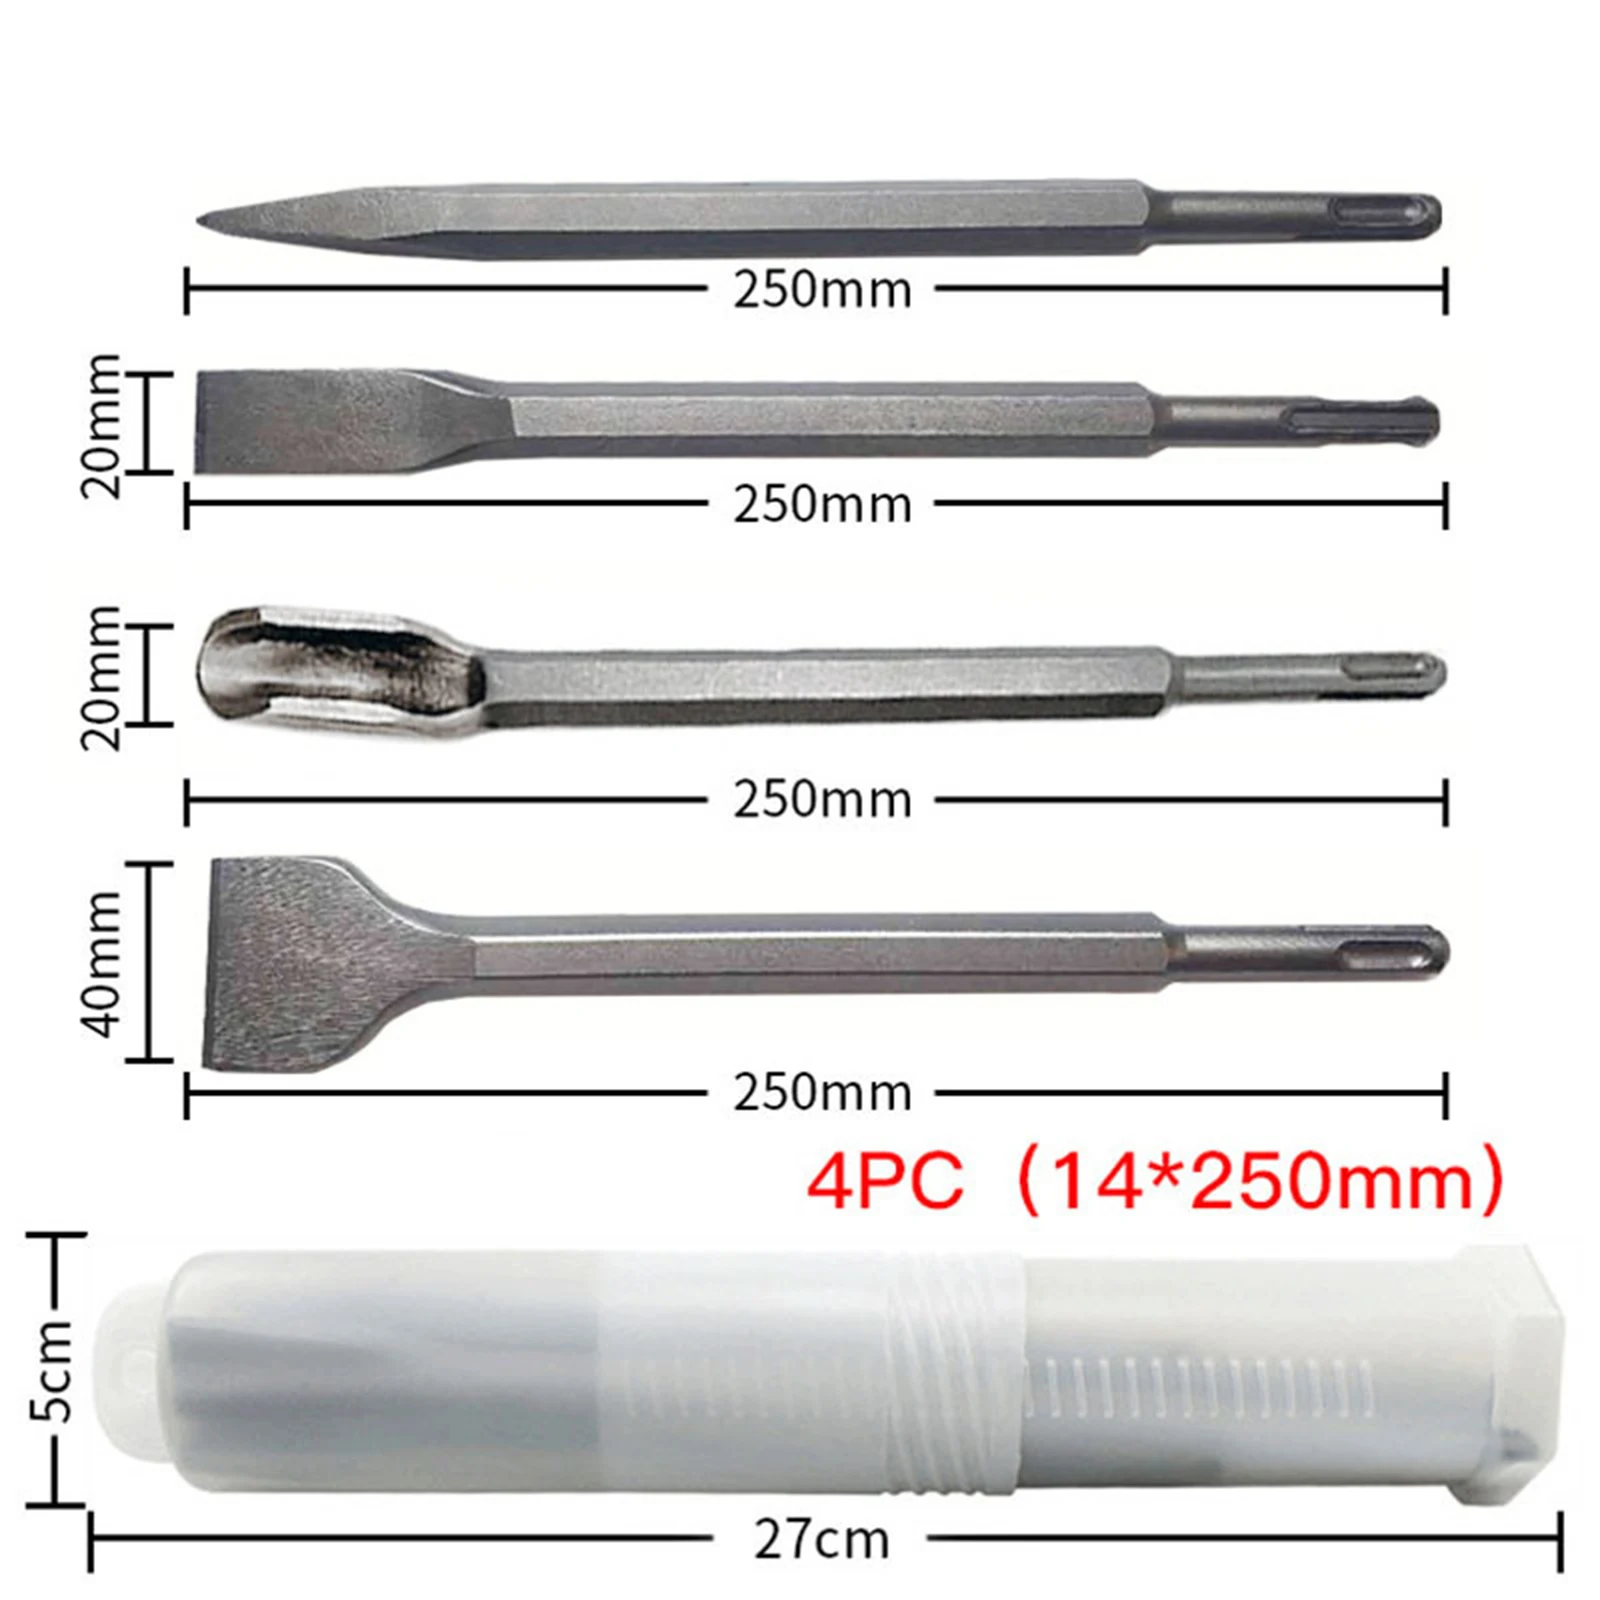 4Pcs Electric Hammer Chisel Set SDS Plus Shank Drill Bit Point Groove Flat Chisel Masonry Tools For Concrete Brick Wall Rock greener opener drill bit wall perforator diamond dry drill bit hole drill hood air conditioning concrete drill hand tools